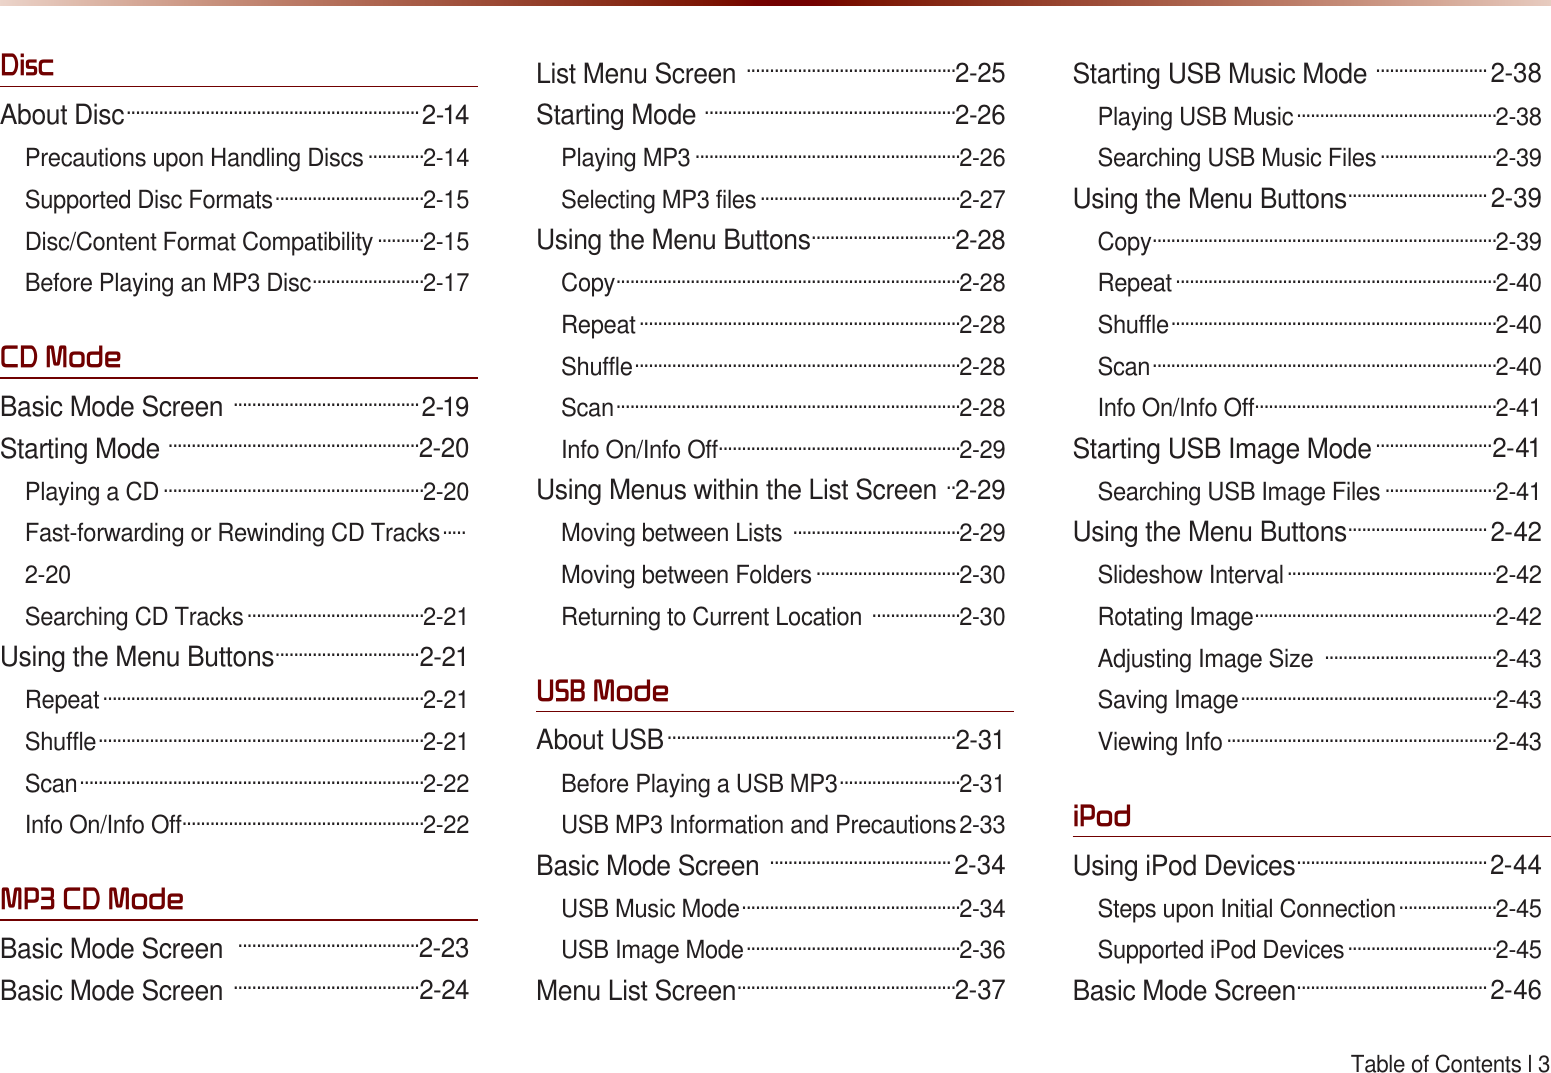 Table of Contents l 3 &apos;LVFAbout Disc ...............................................................2-14Precautions upon Handling Discs ............2-14Supported Disc Formats ................................2-15Disc/Content Format Compatibility ..........2-15Before Playing an MP3 Disc ........................2-17&amp;&apos;0RGHBasic Mode Screen  ........................................2-19Starting Mode  ......................................................2-20Playing a CD ........................................................2-20Fast-forwarding or Rewinding CD Tracks .....2-20Searching CD Tracks ......................................2-21Using the Menu Buttons...............................2-21Repeat .....................................................................2-21Shuffle ......................................................................2-21Scan ..........................................................................2-22Info On/Info Off....................................................2-2203&amp;&apos;0RGHBasic Mode Screen.......................................2-23Basic Mode Screen  ........................................2-24List Menu Screen  .............................................2-25Starting Mode  ......................................................2-26Playing MP3 .........................................................2-26Selecting MP3 files ...........................................2-27Using the Menu Buttons...............................2-28Copy ..........................................................................2-28Repeat .....................................................................2-28Shuffle ......................................................................2-28Scan ..........................................................................2-28Info On/Info Off....................................................2-29Using Menus within the List Screen  ..2-29Moving between Lists  ....................................2-29Moving between Folders ...............................2-30Returning to Current Location ...................2-3086%0RGHAbout USB ..............................................................2-31Before Playing a USB MP3 ..........................2-31USB MP3 Information and Precautions 2-33Basic Mode Screen  .......................................2-34USB Music Mode ...............................................2-34USB Image Mode ..............................................2-36Menu List Screen...............................................2-37Starting USB Music Mode  ........................2-38Playing USB Music ...........................................2-38Searching USB Music Files .........................2-39Using the Menu Buttons..............................2-39Copy ..........................................................................2-39Repeat .....................................................................2-40Shuffle ......................................................................2-40Scan ..........................................................................2-40Info On/Info Off....................................................2-41Starting USB Image Mode .........................2-41Searching USB Image Files ........................2-41Using the Menu Buttons..............................2-42Slideshow Interval .............................................2-42Rotating Image ....................................................2-42Adjusting Image Size  .....................................2-43Saving Image .......................................................2-43Viewing Info ..........................................................2-43L3RGUsing iPod Devices .........................................2-44Steps upon Initial Connection .....................2-45Supported iPod Devices ................................2-45Basic Mode Screen.........................................2-46